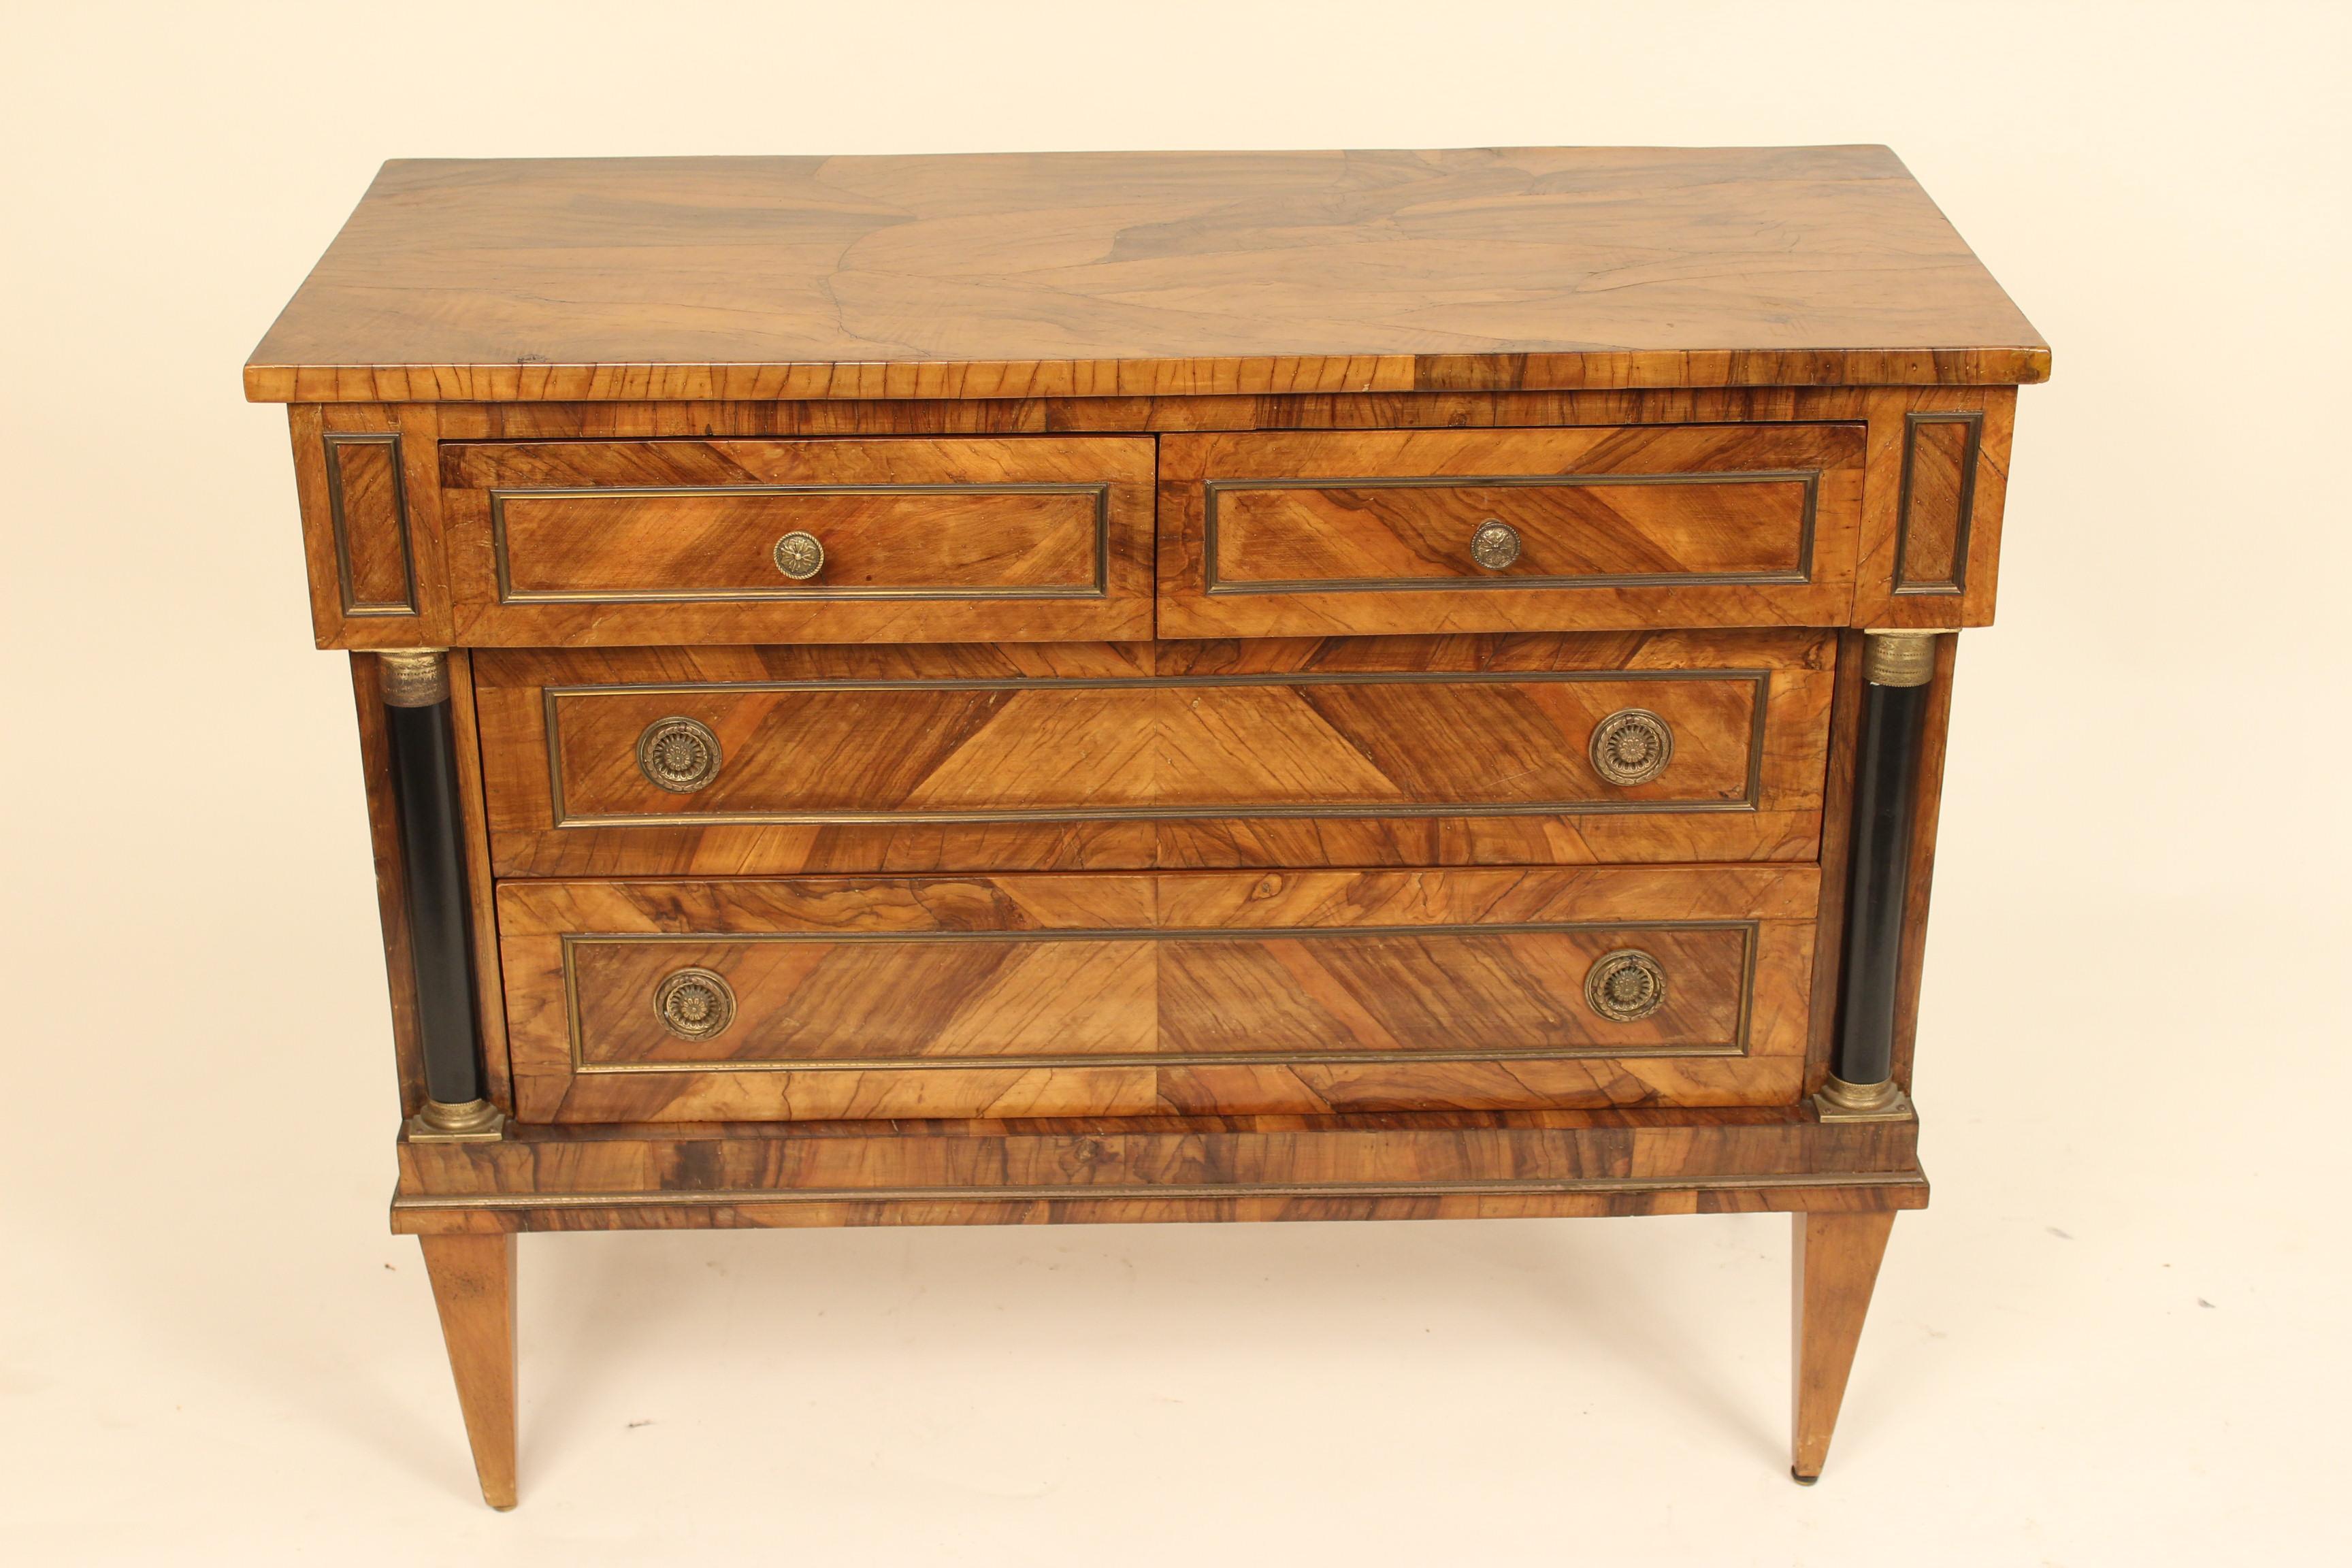 Italian neoclassical style burl olive wood chest of drawers with ebonized columns and brass hardware, mid-20th century.